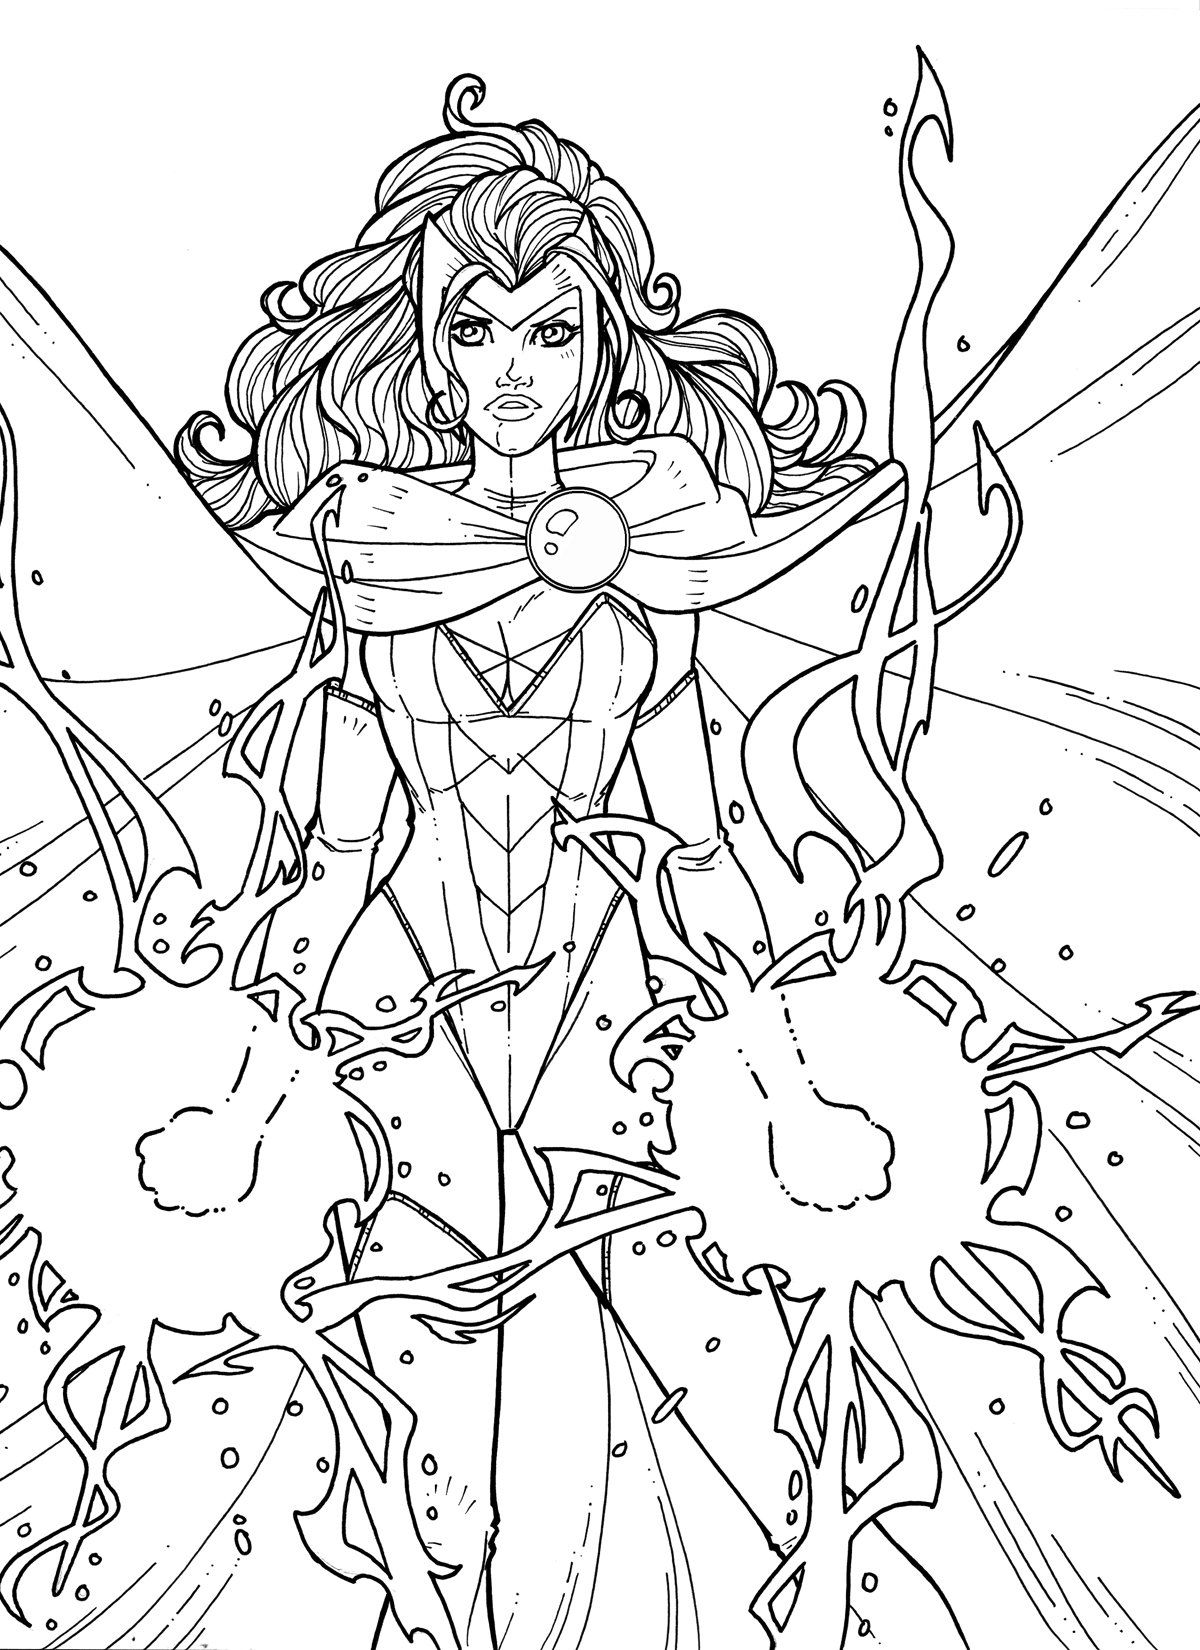 Witch coloring pages, Marvel coloring ...pinterest.com